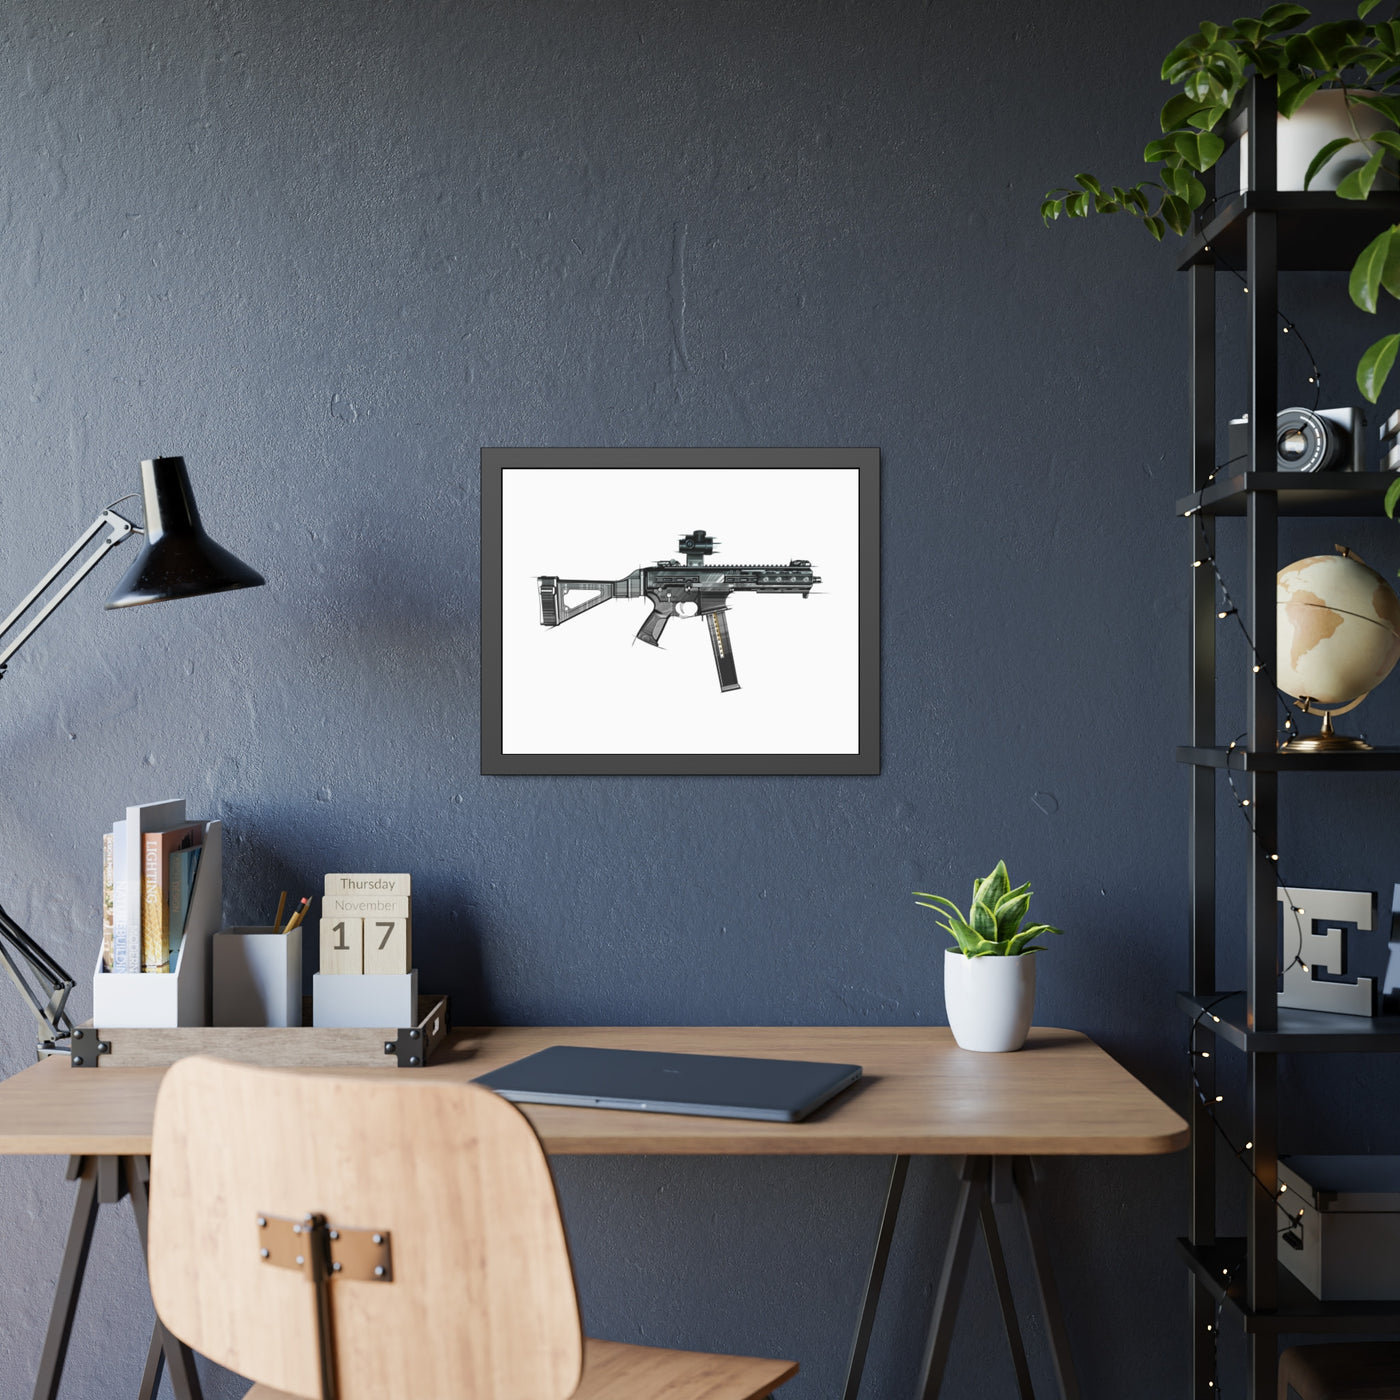 .45 Cal SMG Painting - Just The Piece - Black Frame - Value Collection